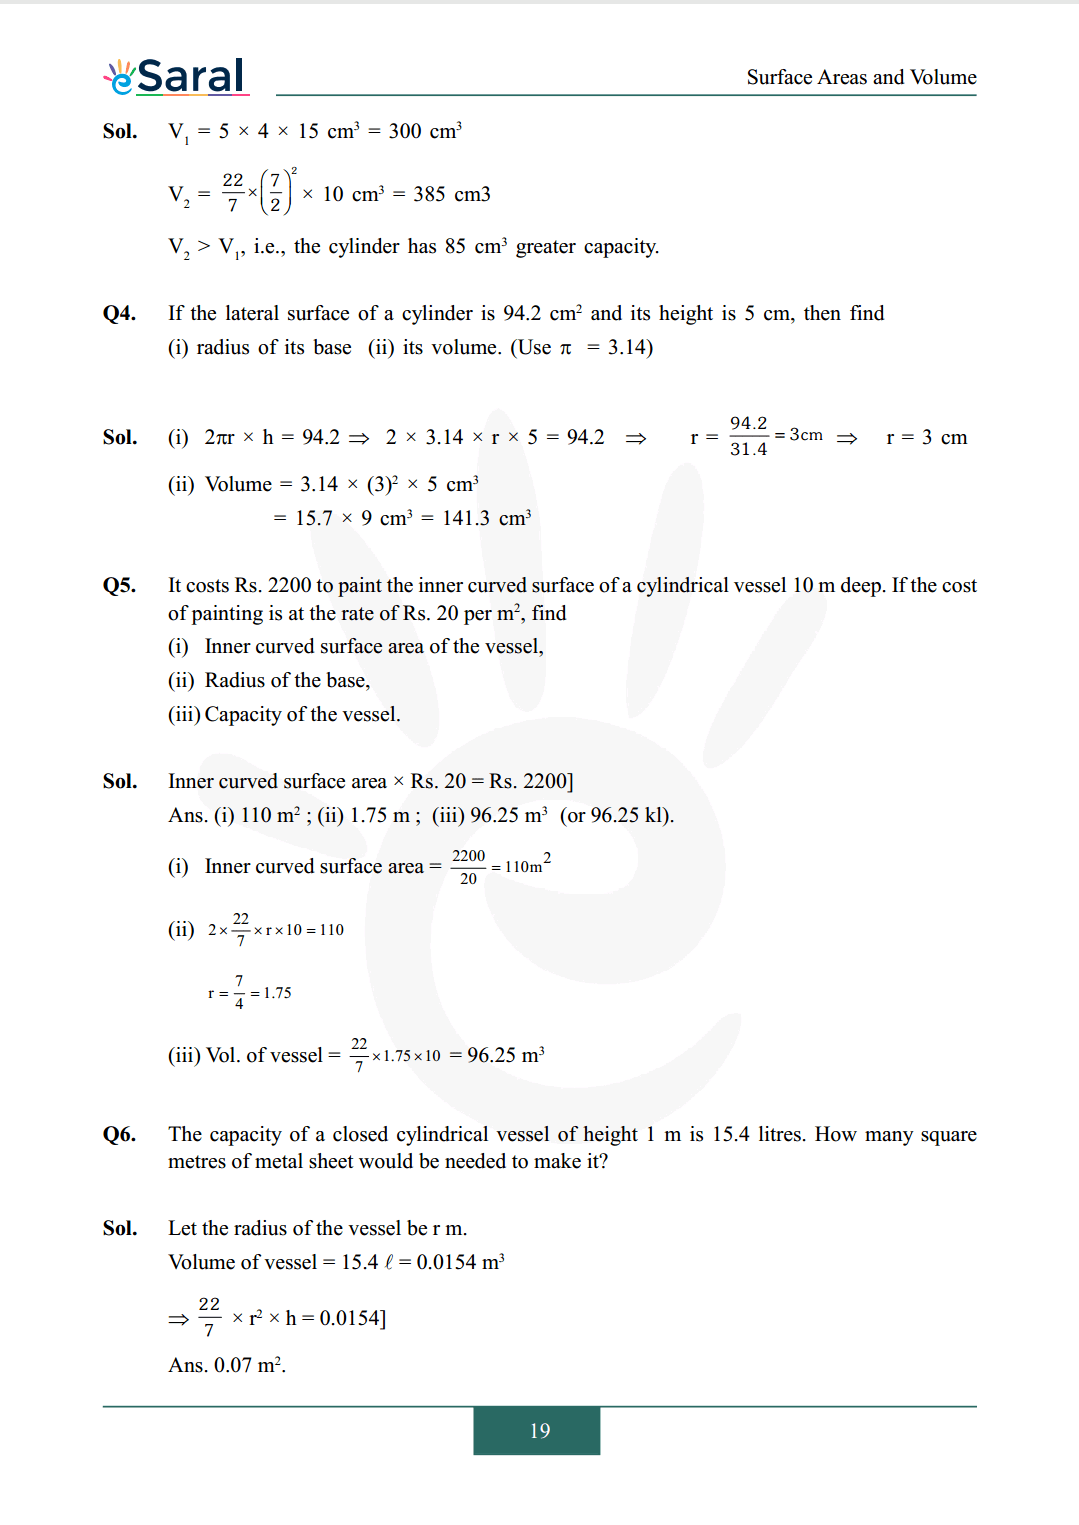 Class 9 maths chapter 13 exercise 13.6 solutions Image 2